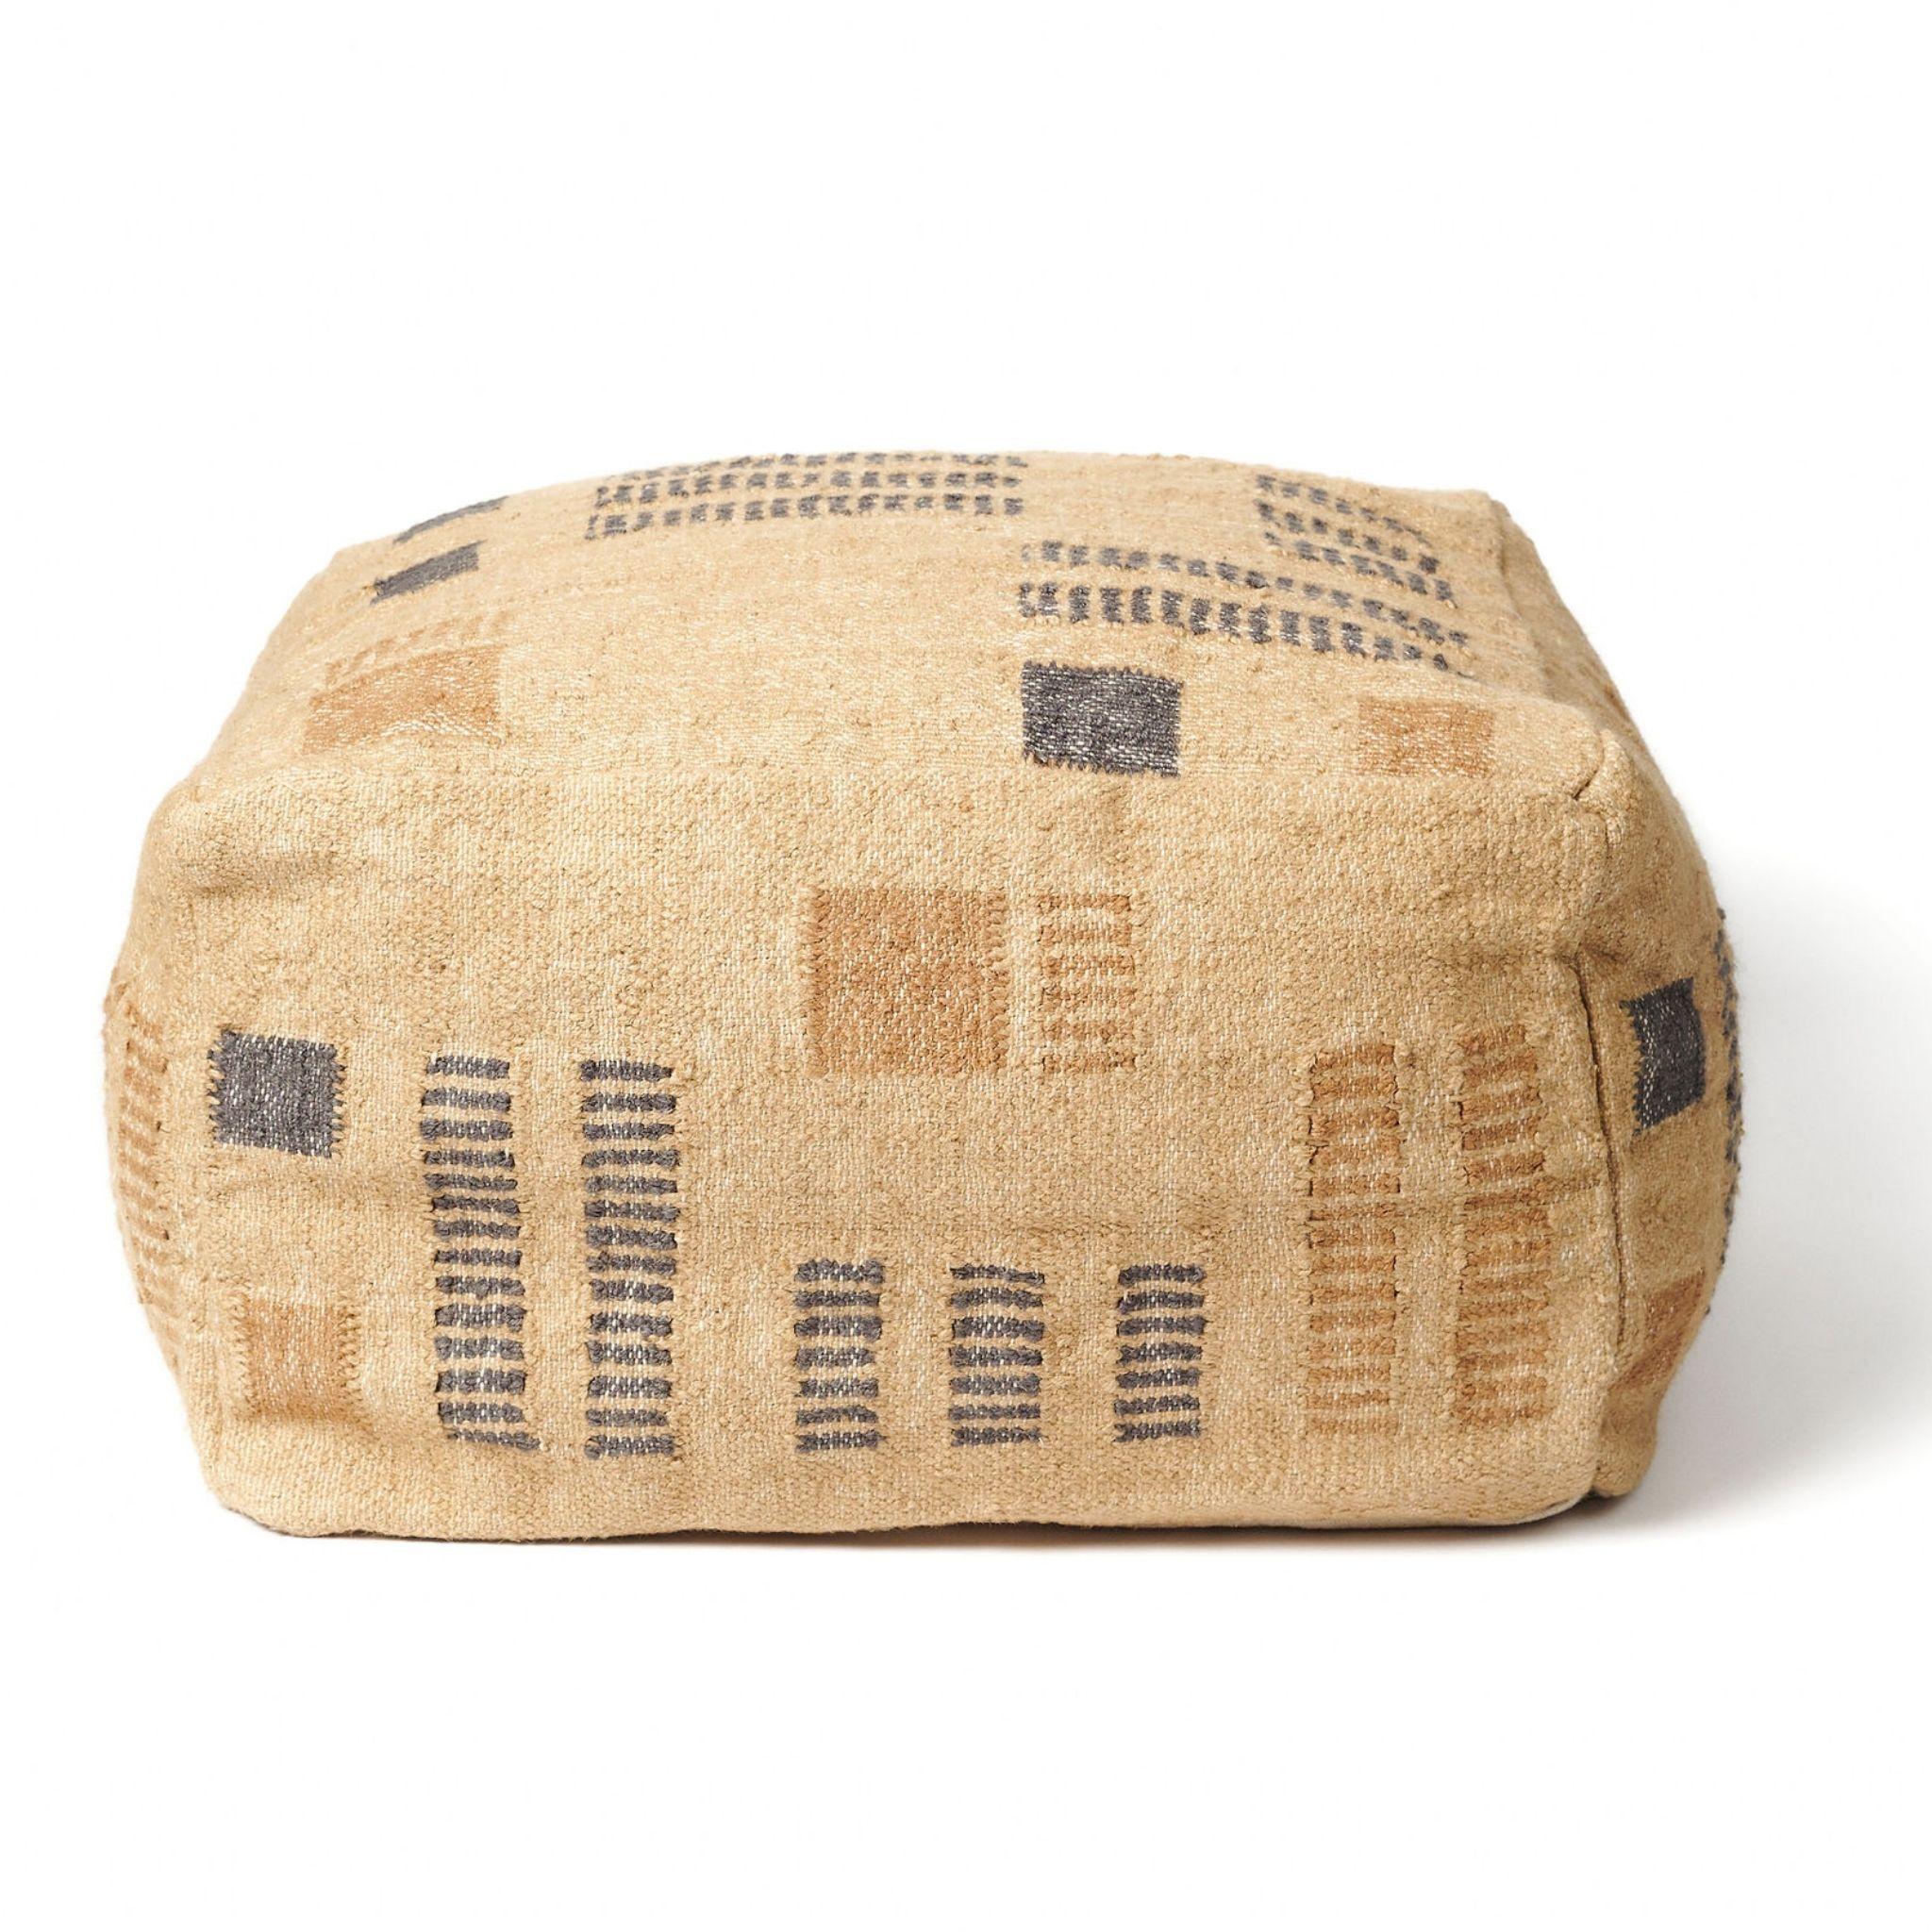 Wheat Pouf Handwoven In Jute And Cotton By Artisans In Soft Earthy Hues In New Condition For Sale In Bloomfield Hills, MI